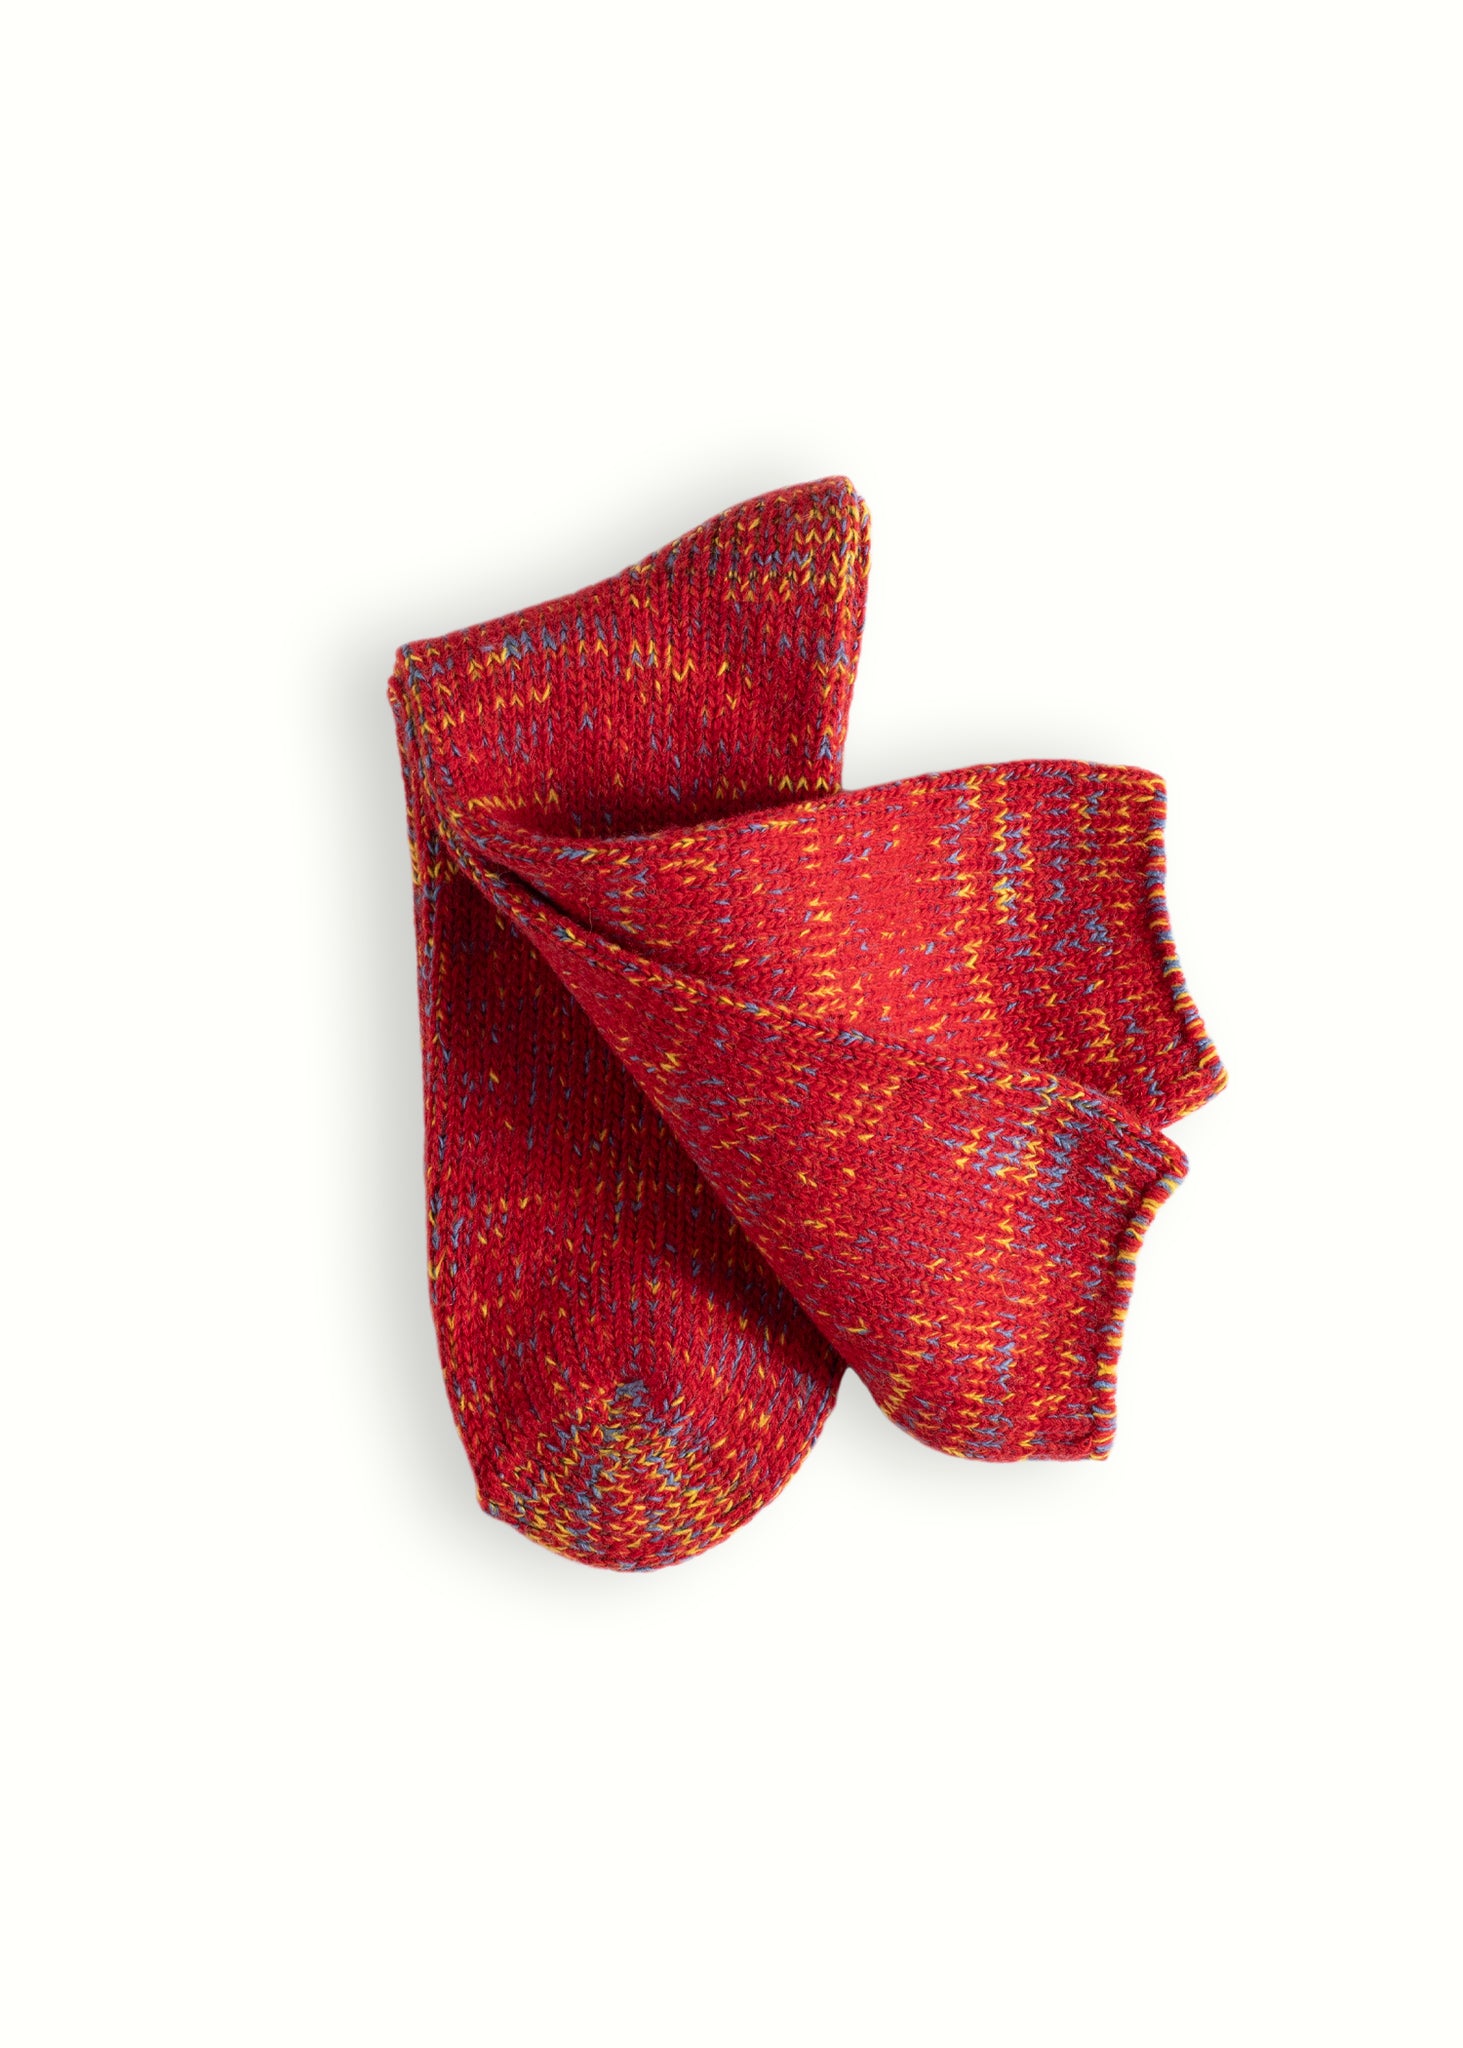 Thunders Love Wool Recycled Red Socks